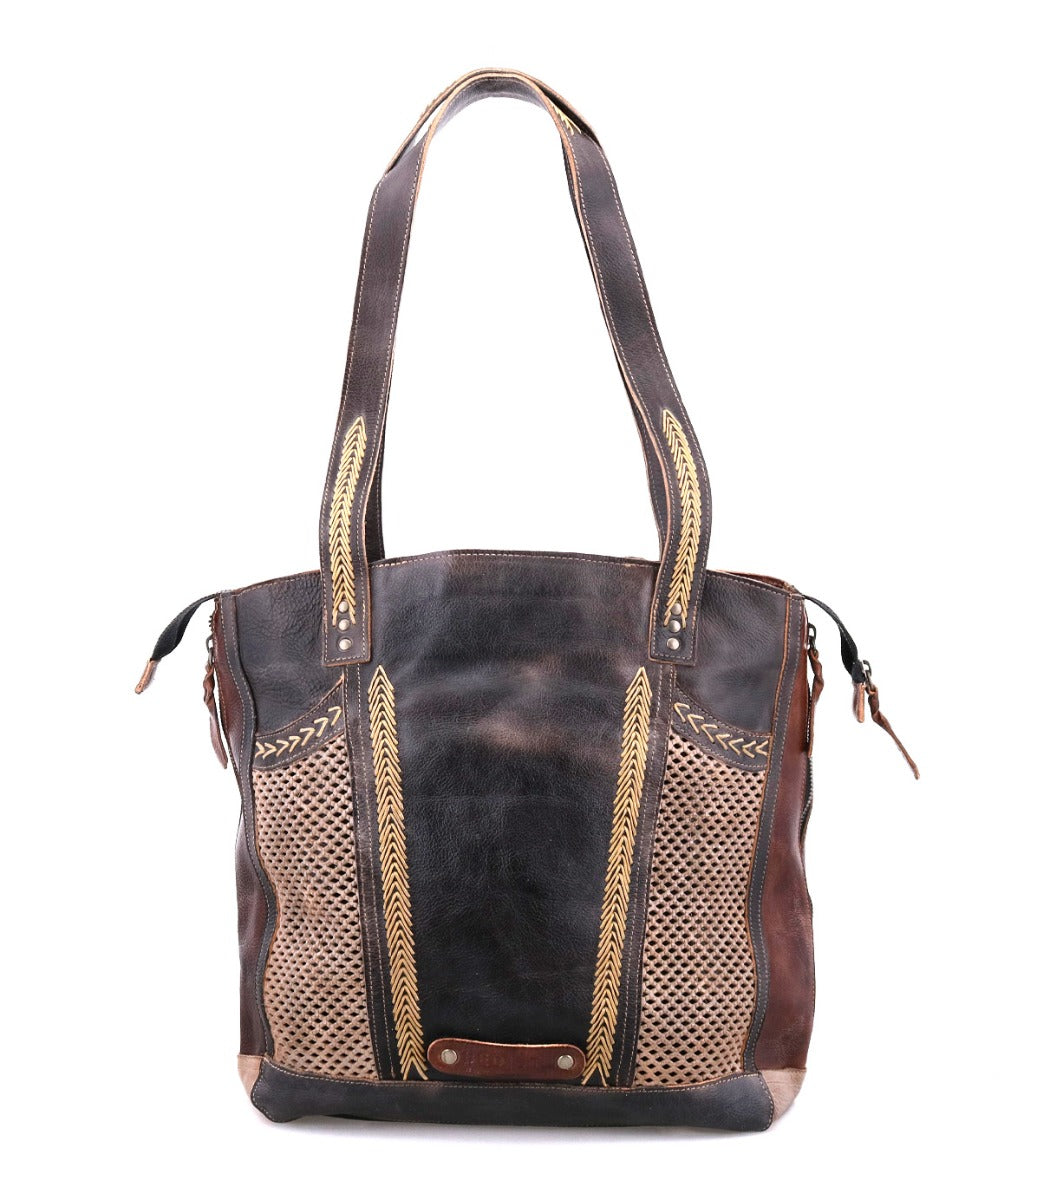 A brown and tan Amelie leather tote bag by Bed Stu.